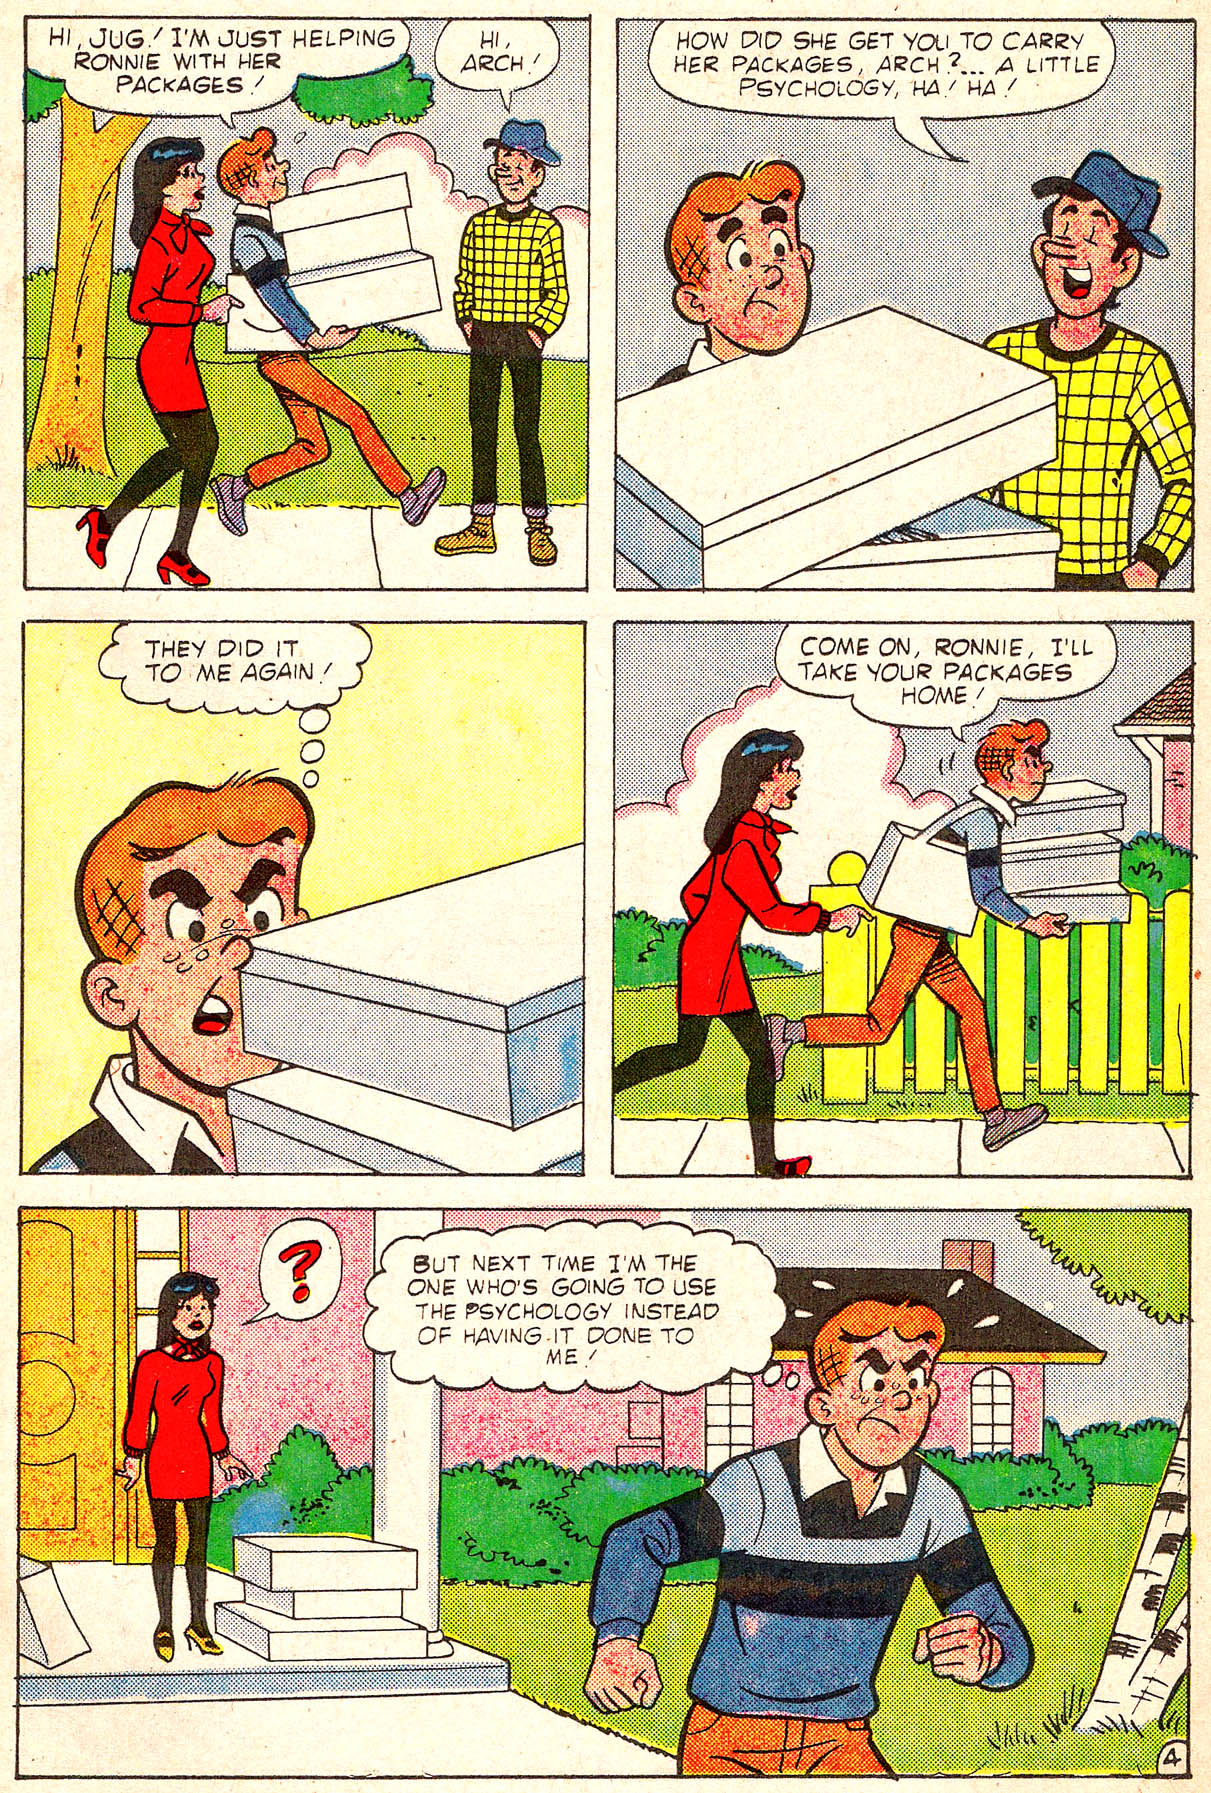 Read online Archie's Girls Betty and Veronica comic -  Issue #343 - 23